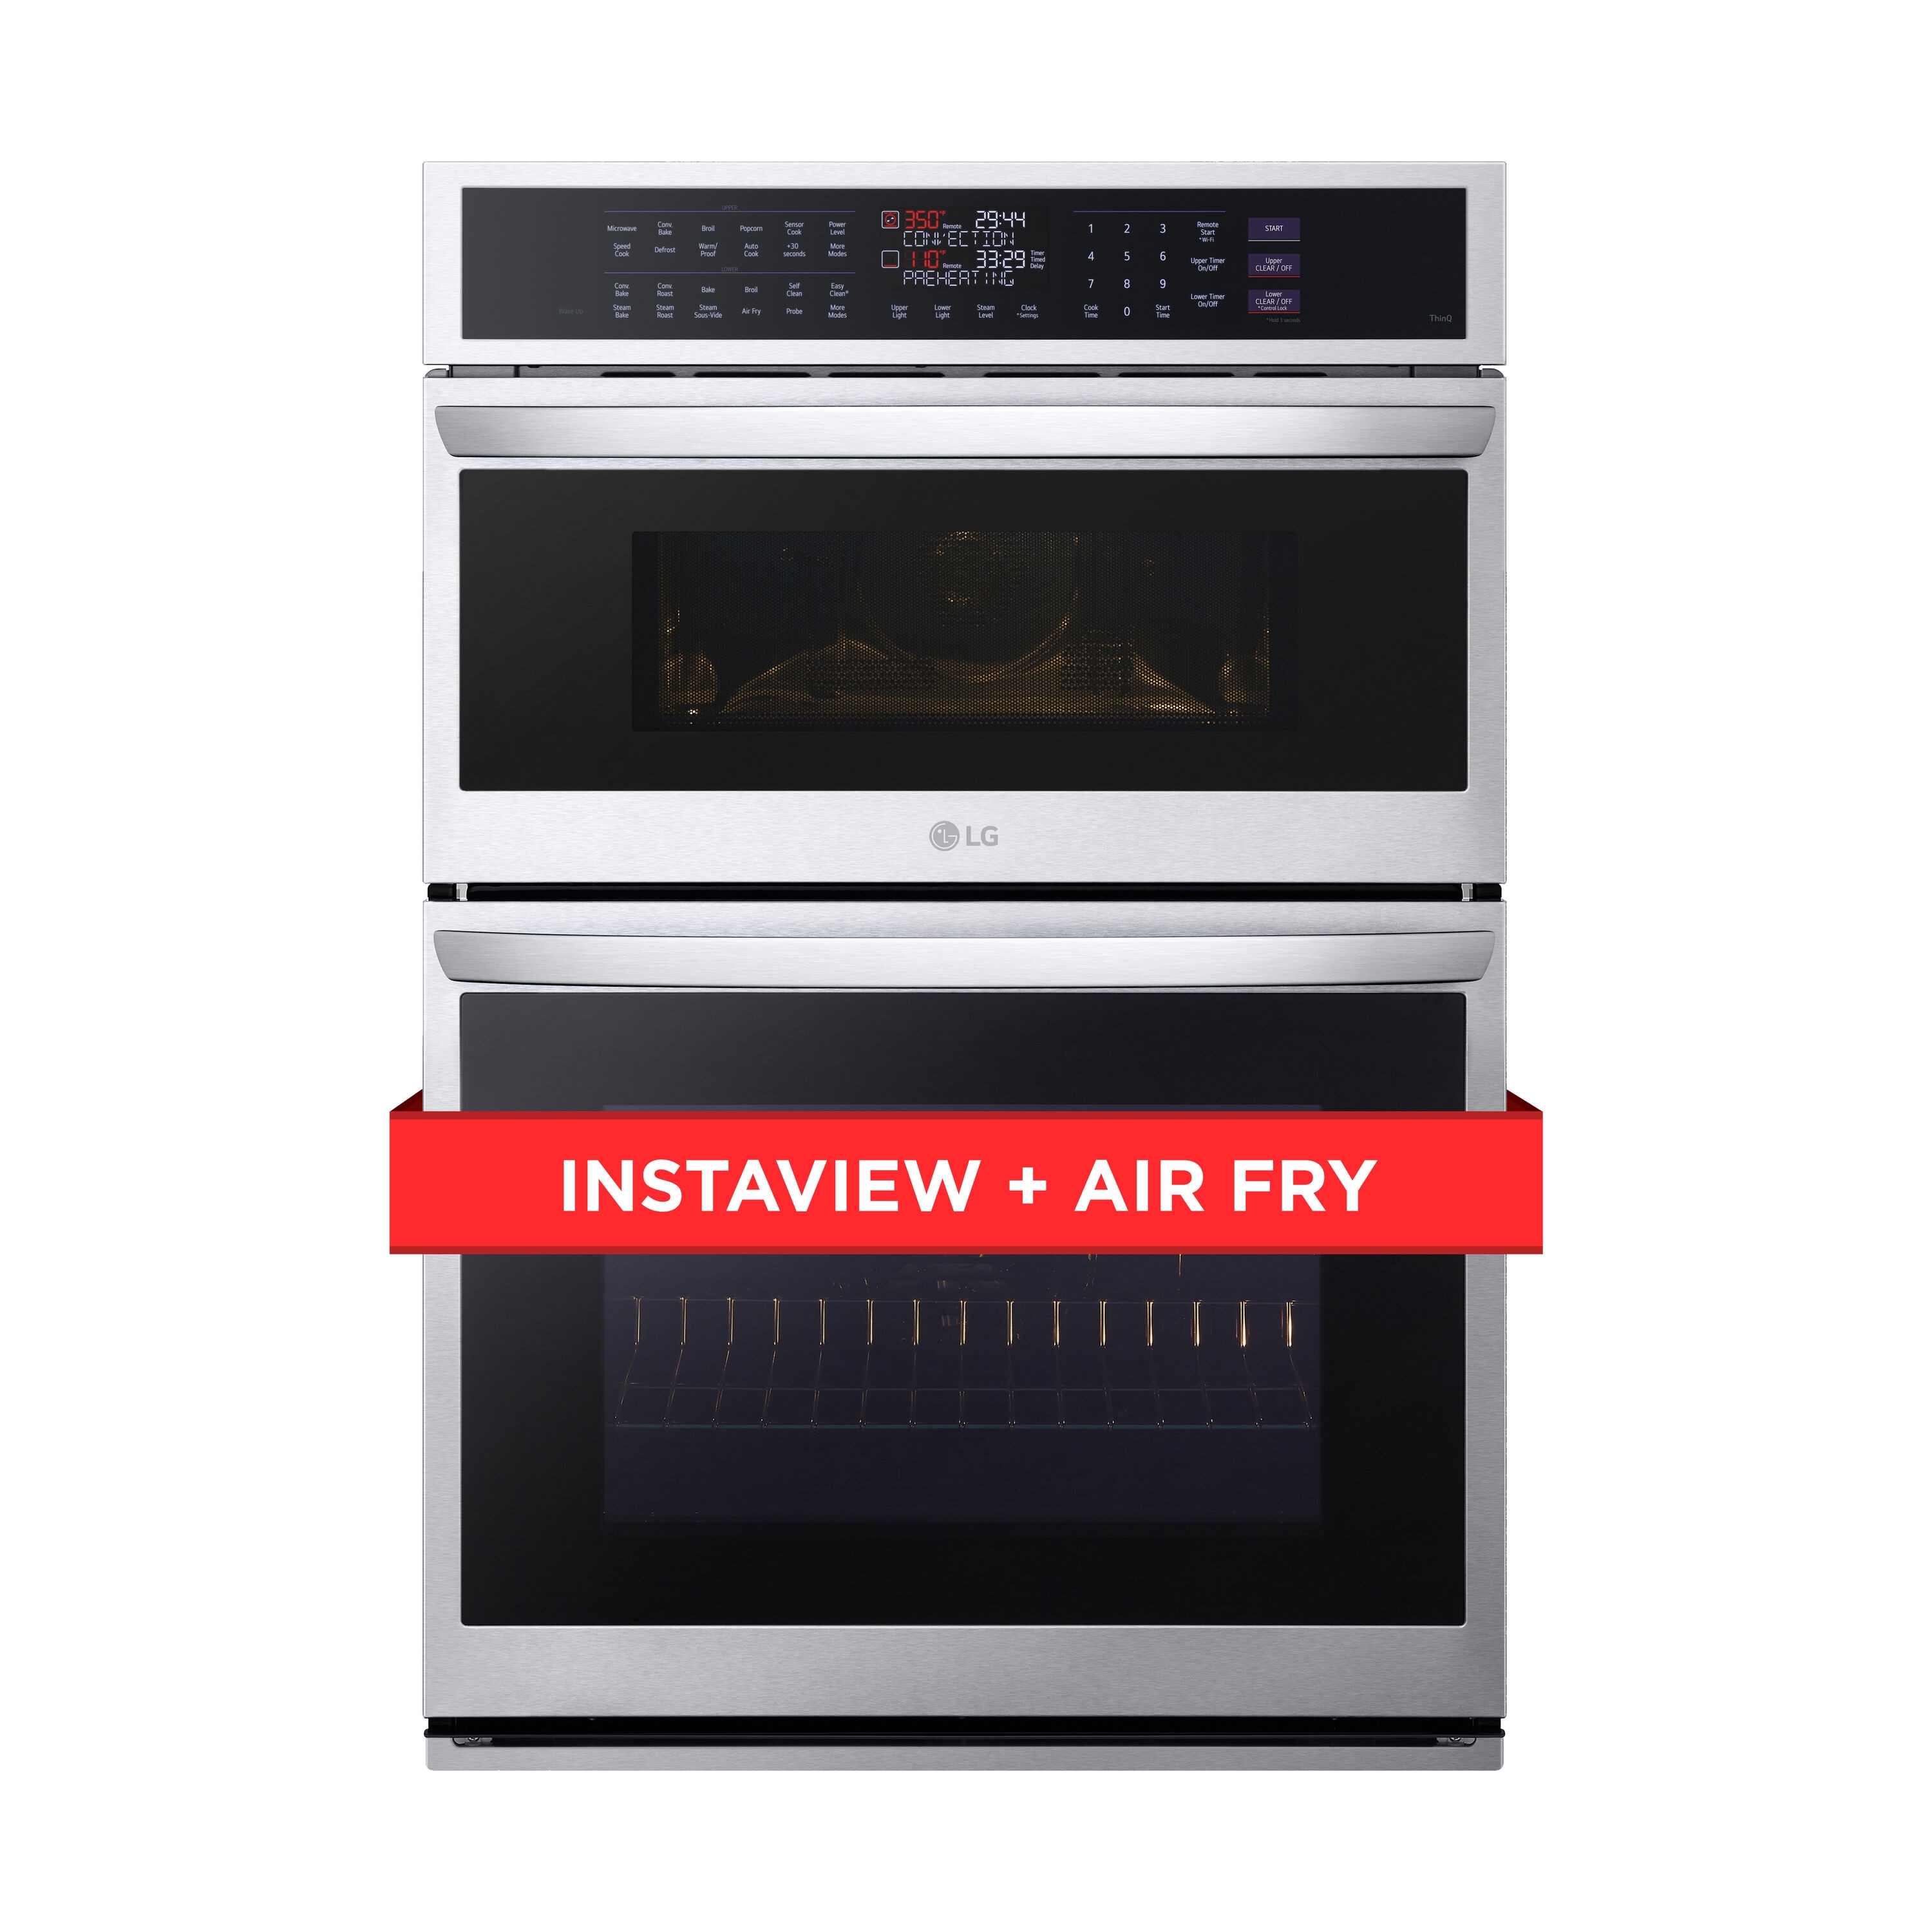 Smart microwave that air fries